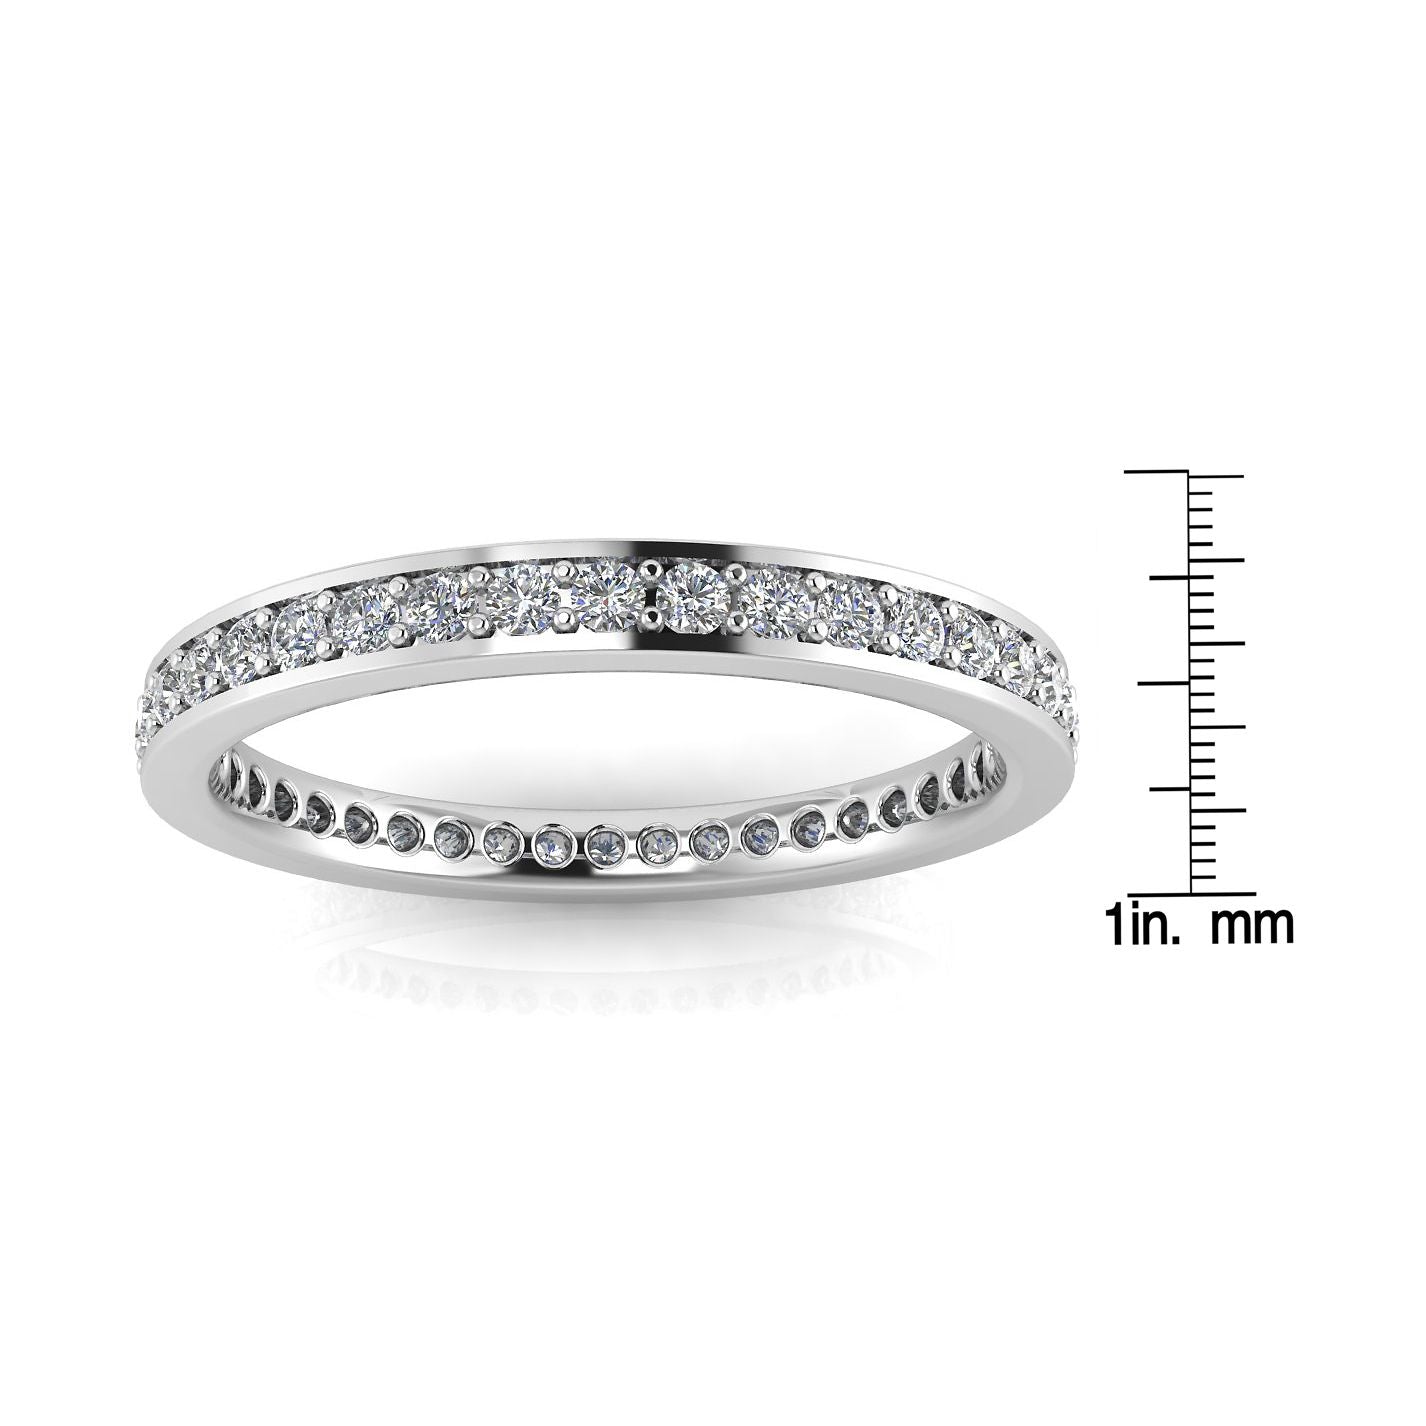 Round Brilliant Cut Diamond Channel Pave Set Eternity Ring In Platinum  (0.96ct. Tw.) Ring Size 7